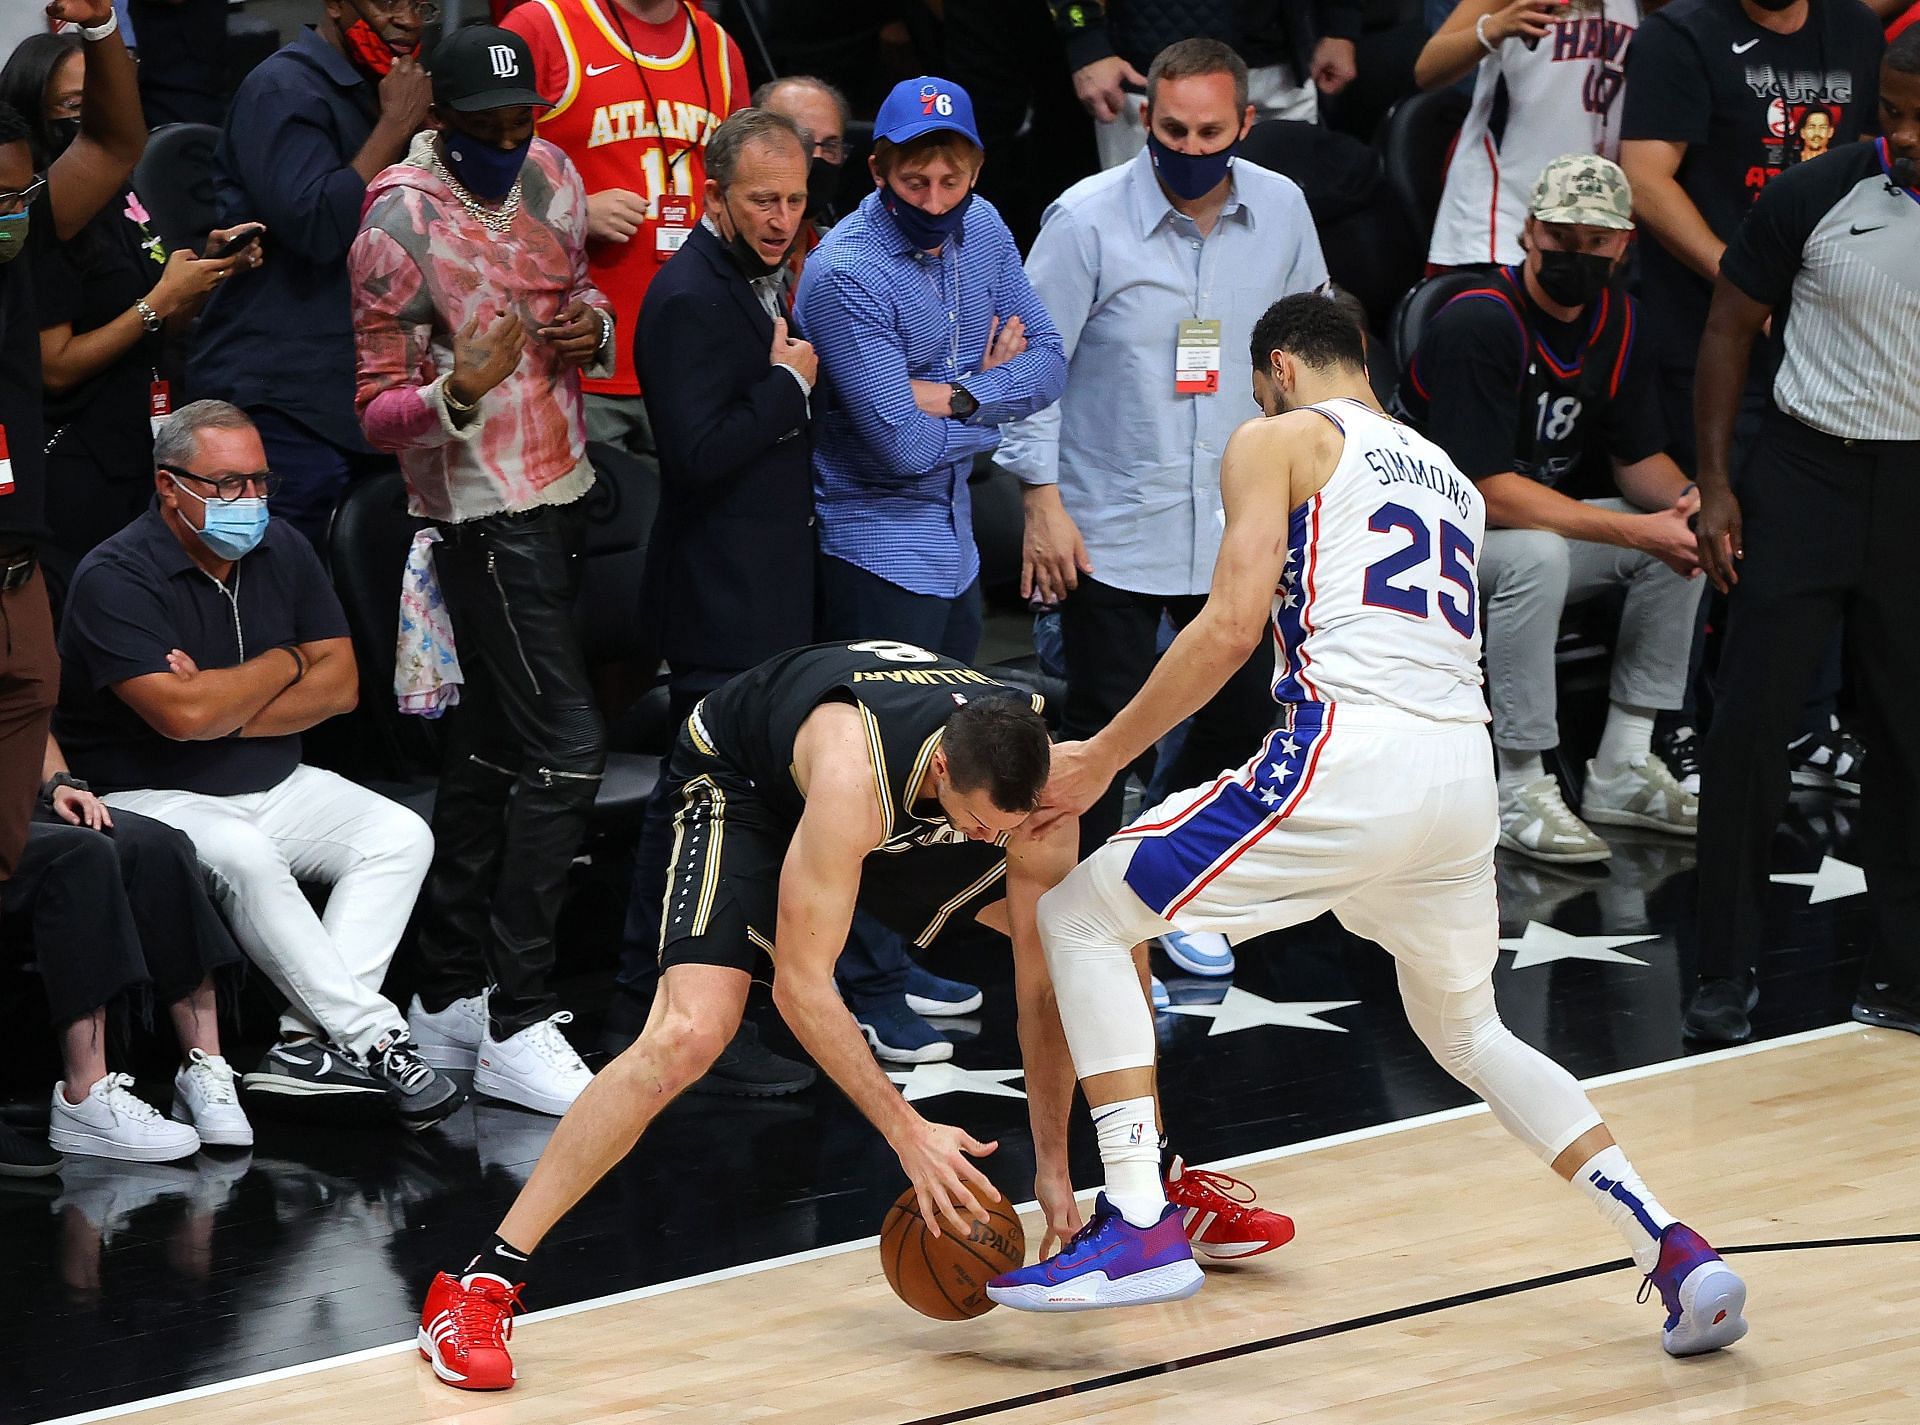 Ben Simmons struggled in the Philadelphia 76ers' series against the Atlanta Hawks in the 2021 NBA Playoffs